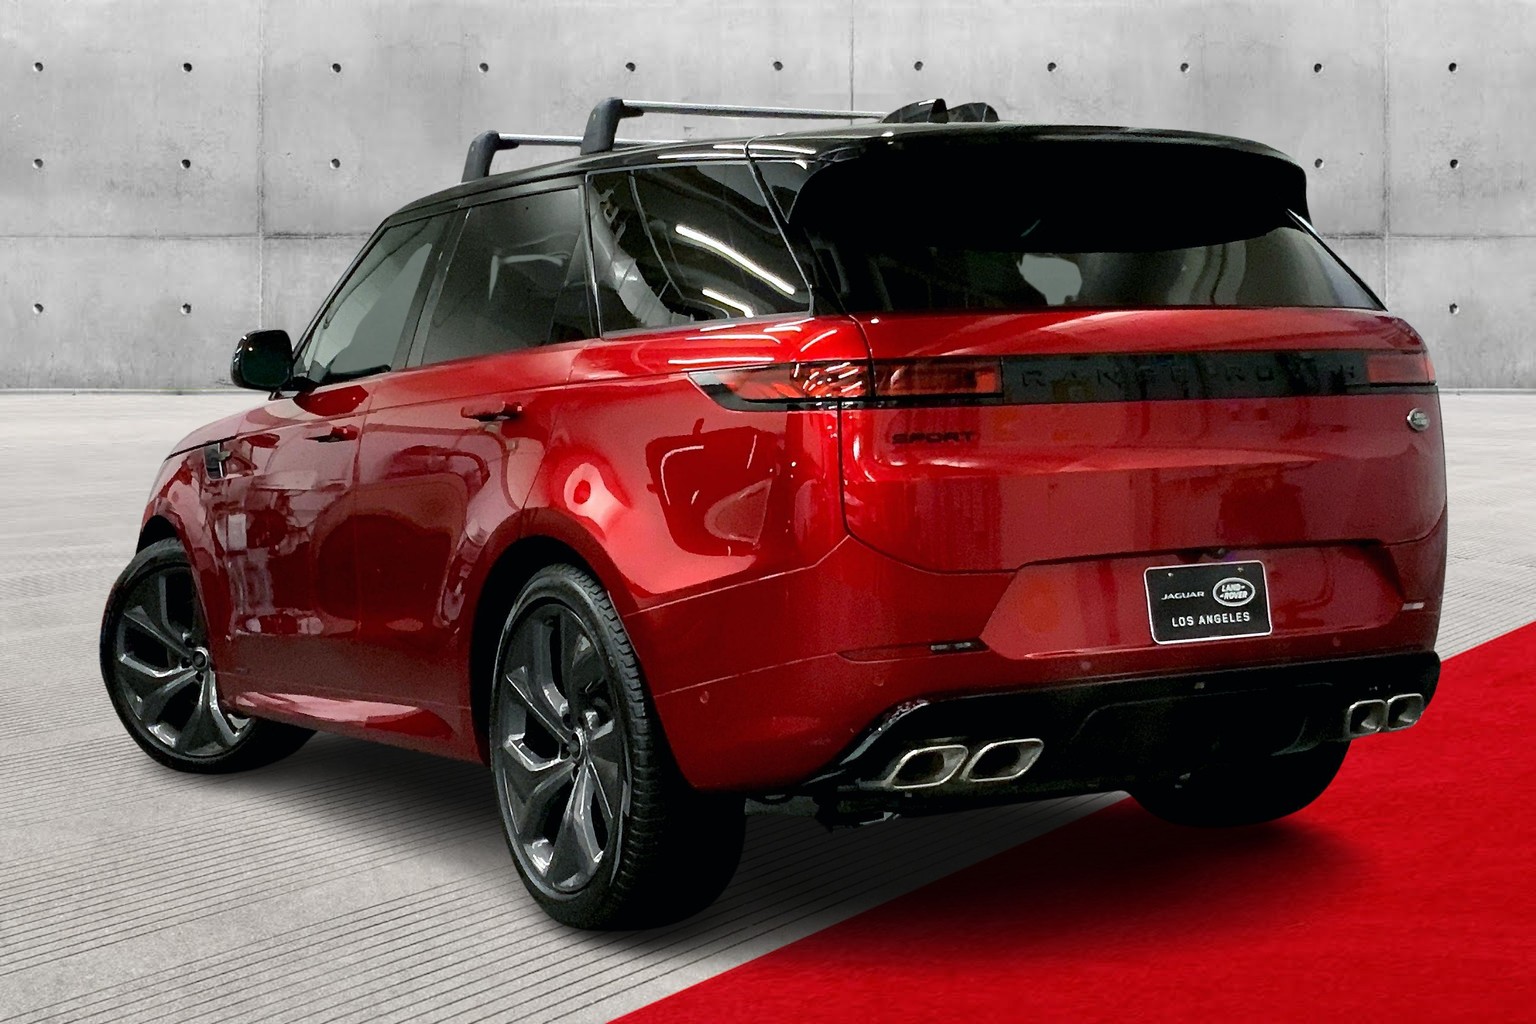 2023 Land Rover Range Rover Sport First Edition - from $145,434